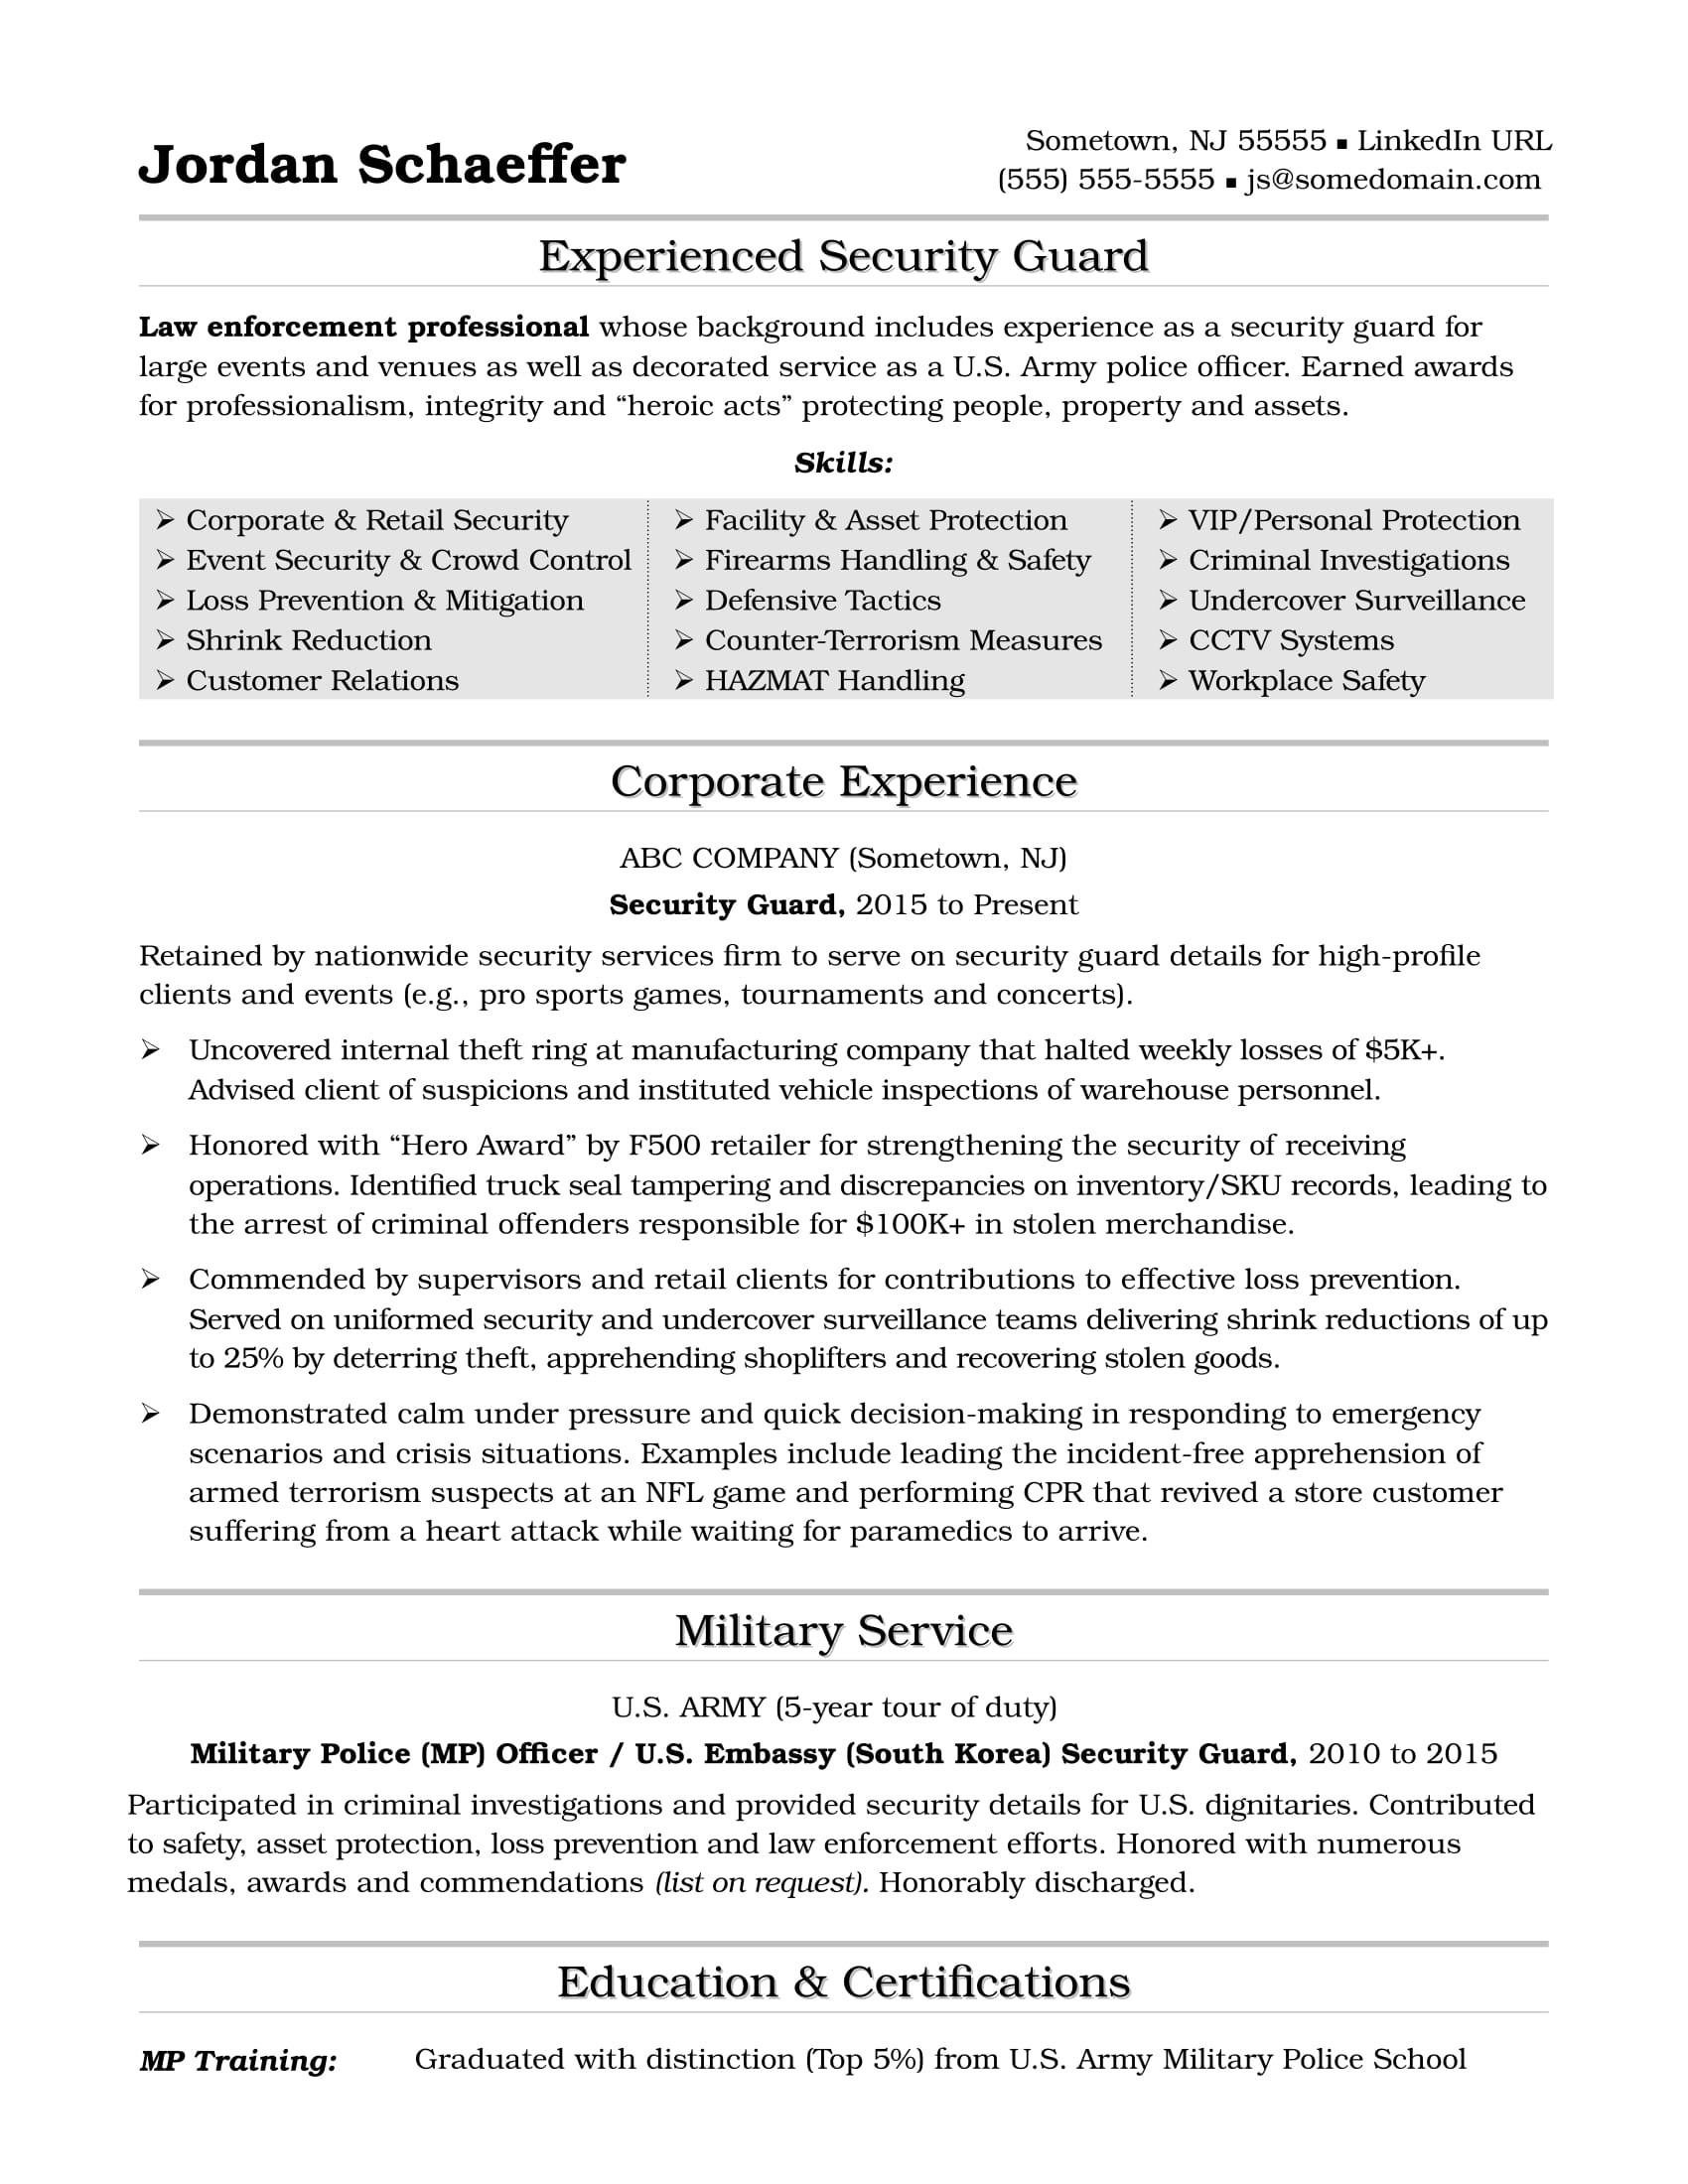 Security Guard Resume Template for Free Security Guard Resume Sample Monster.com